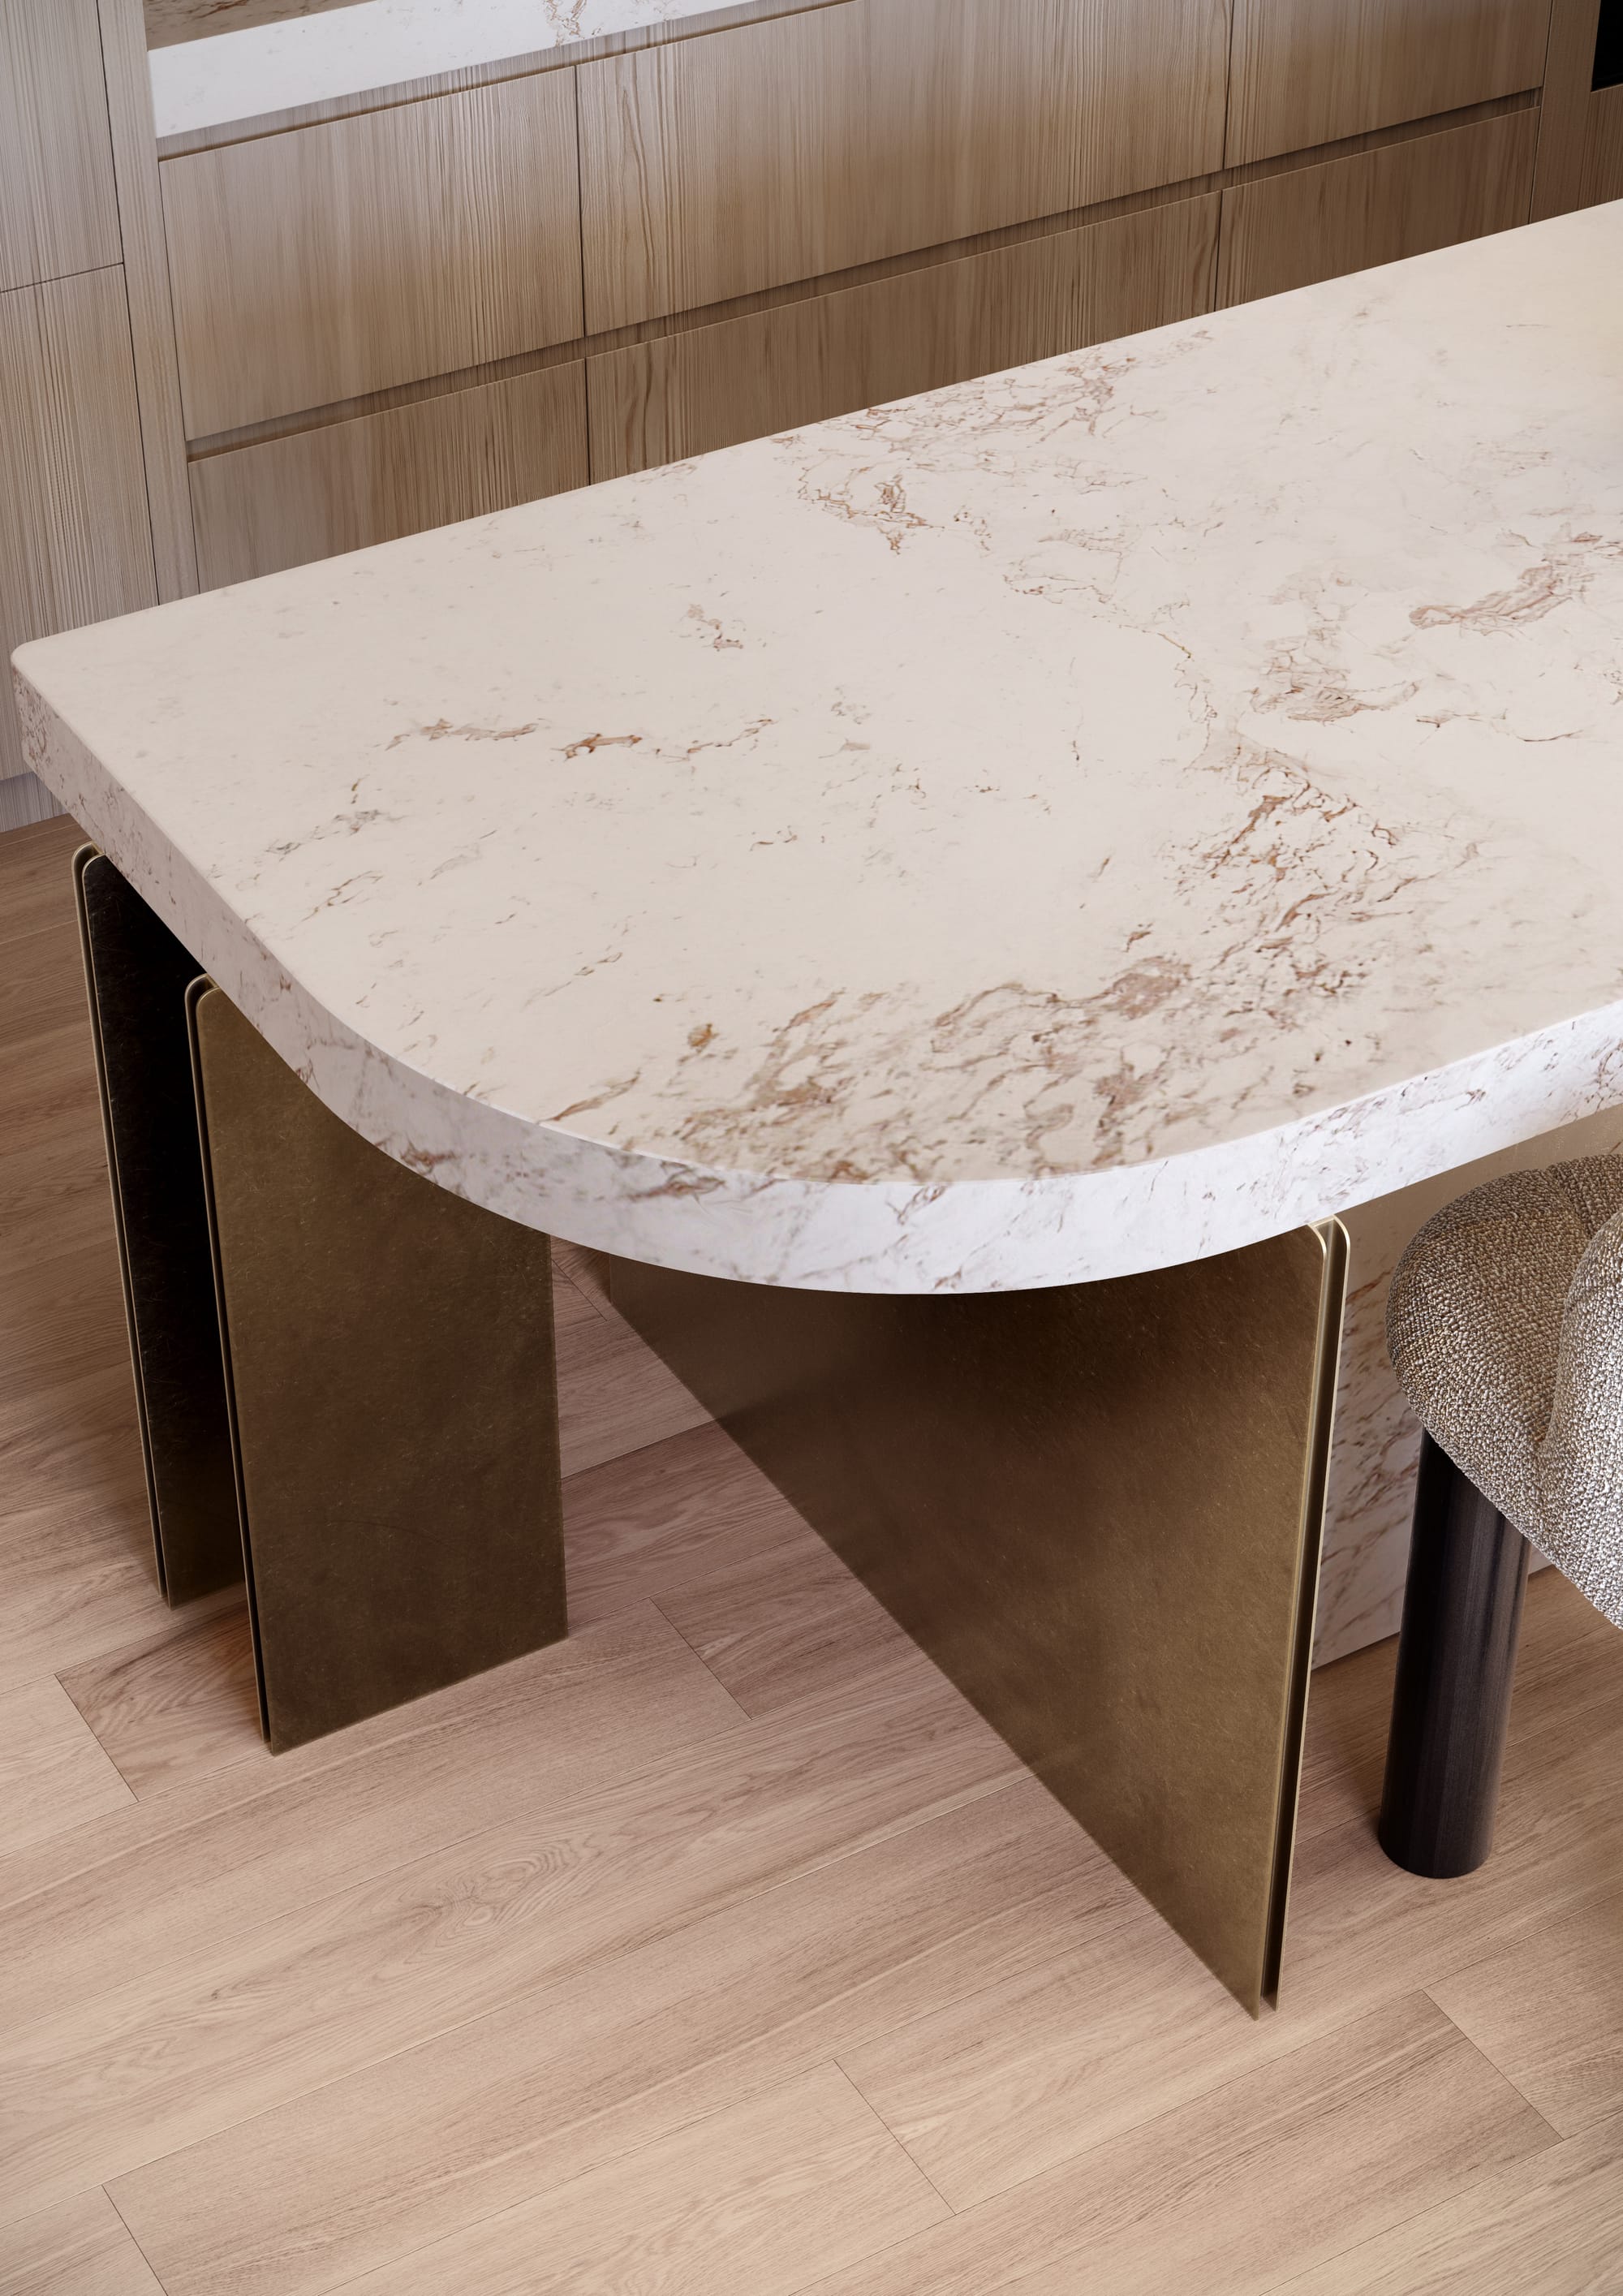 Sculpt Hawthorn by Mim Design, Parallel Workshop and Jack Merlo. Render copyright of Studio Piper. Close up of kitchen benchtop. Marble countertop with brass accent legs. Timber floors and cabinetry in background. 